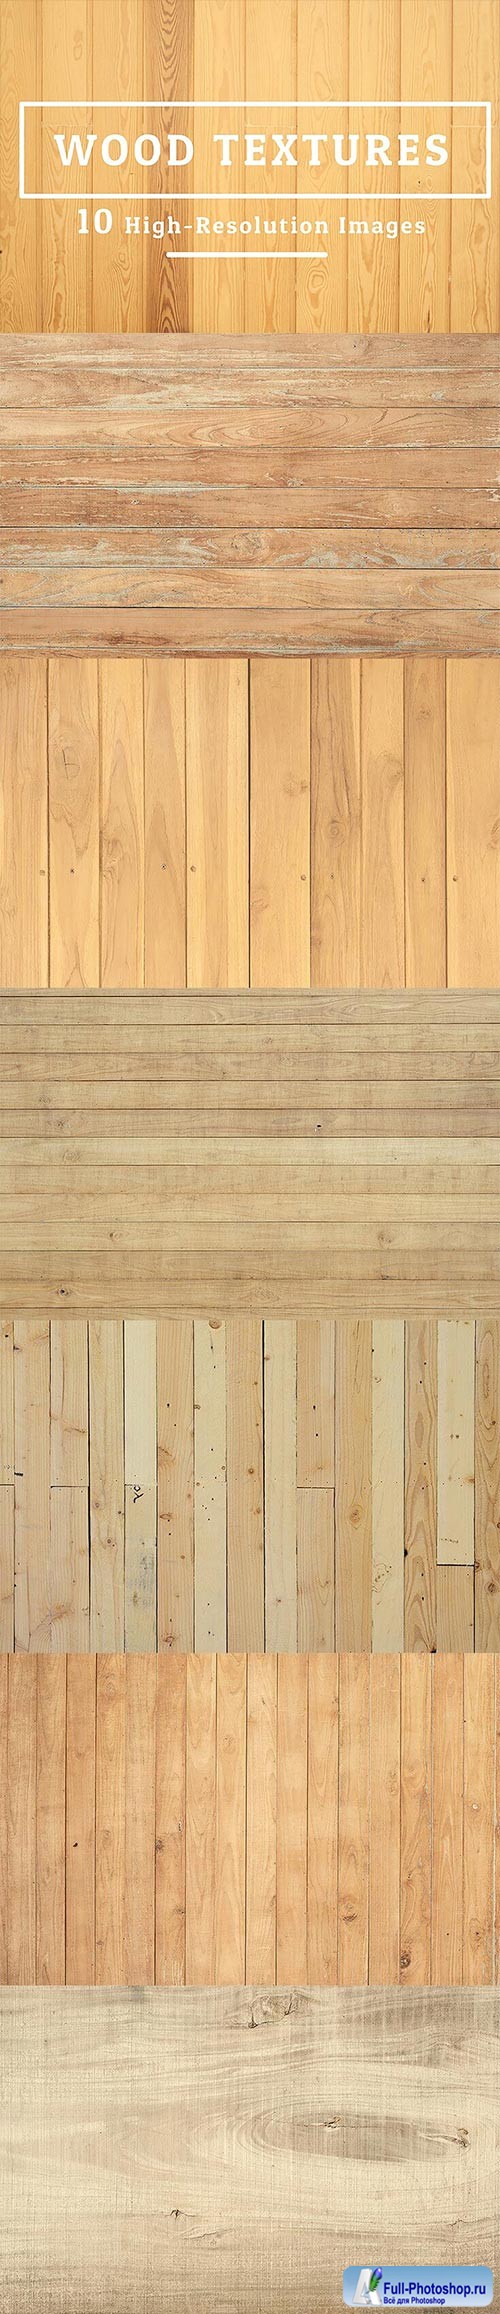 10 Wood Texture Background